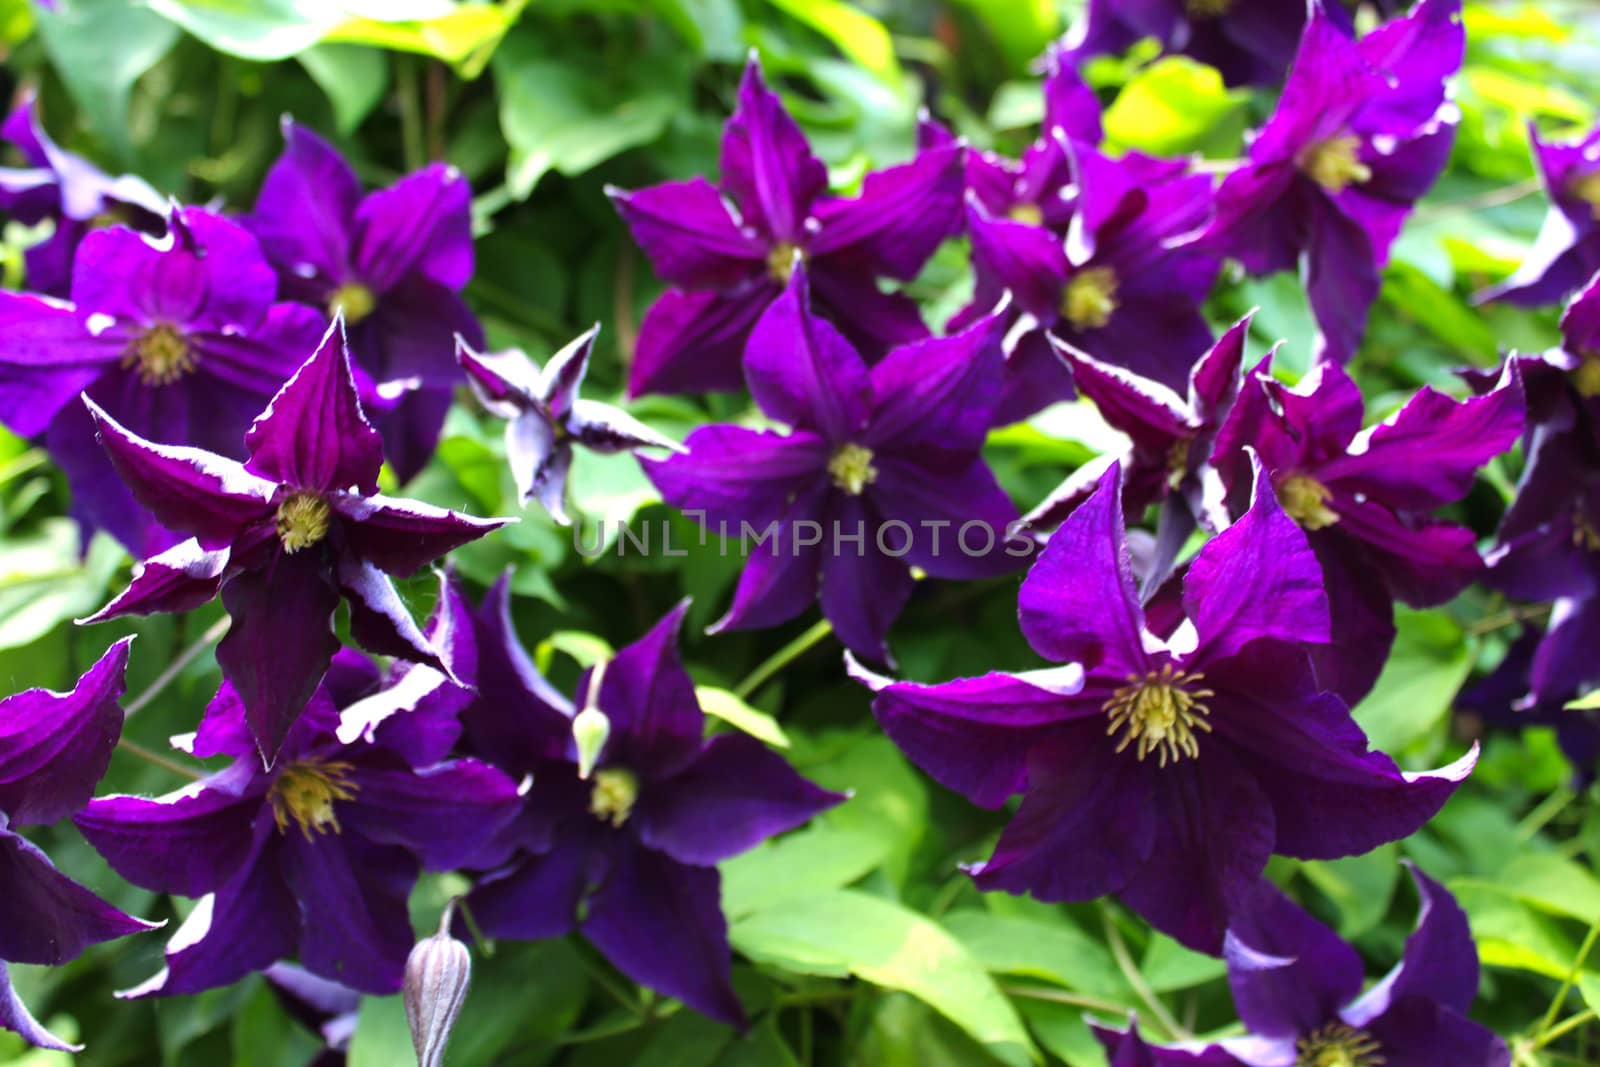 Clematis Flowers by Catmando